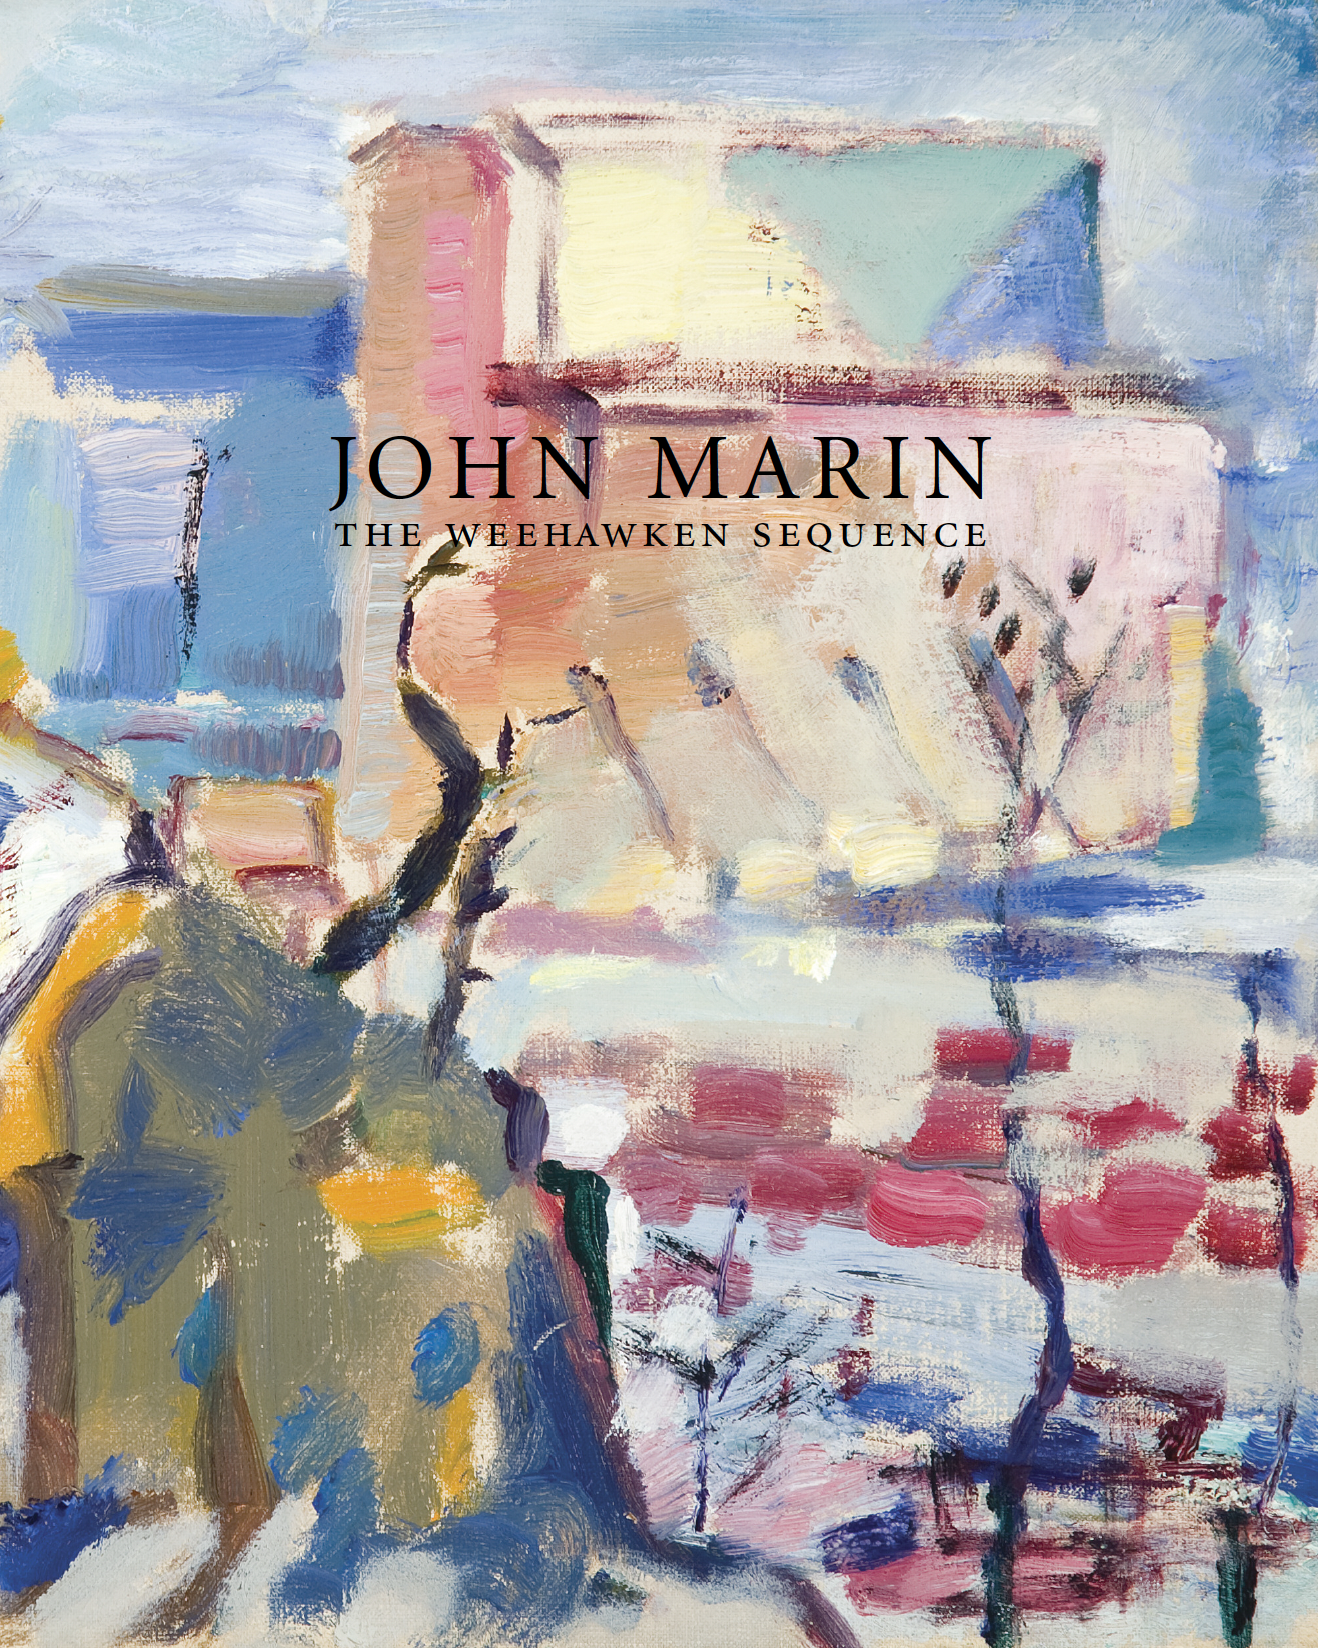 John Marin: # The Weehawken Sequence # 2011 &lt;alt="Catalogue cover with title over an abstract multicolor landscape."&gt; 